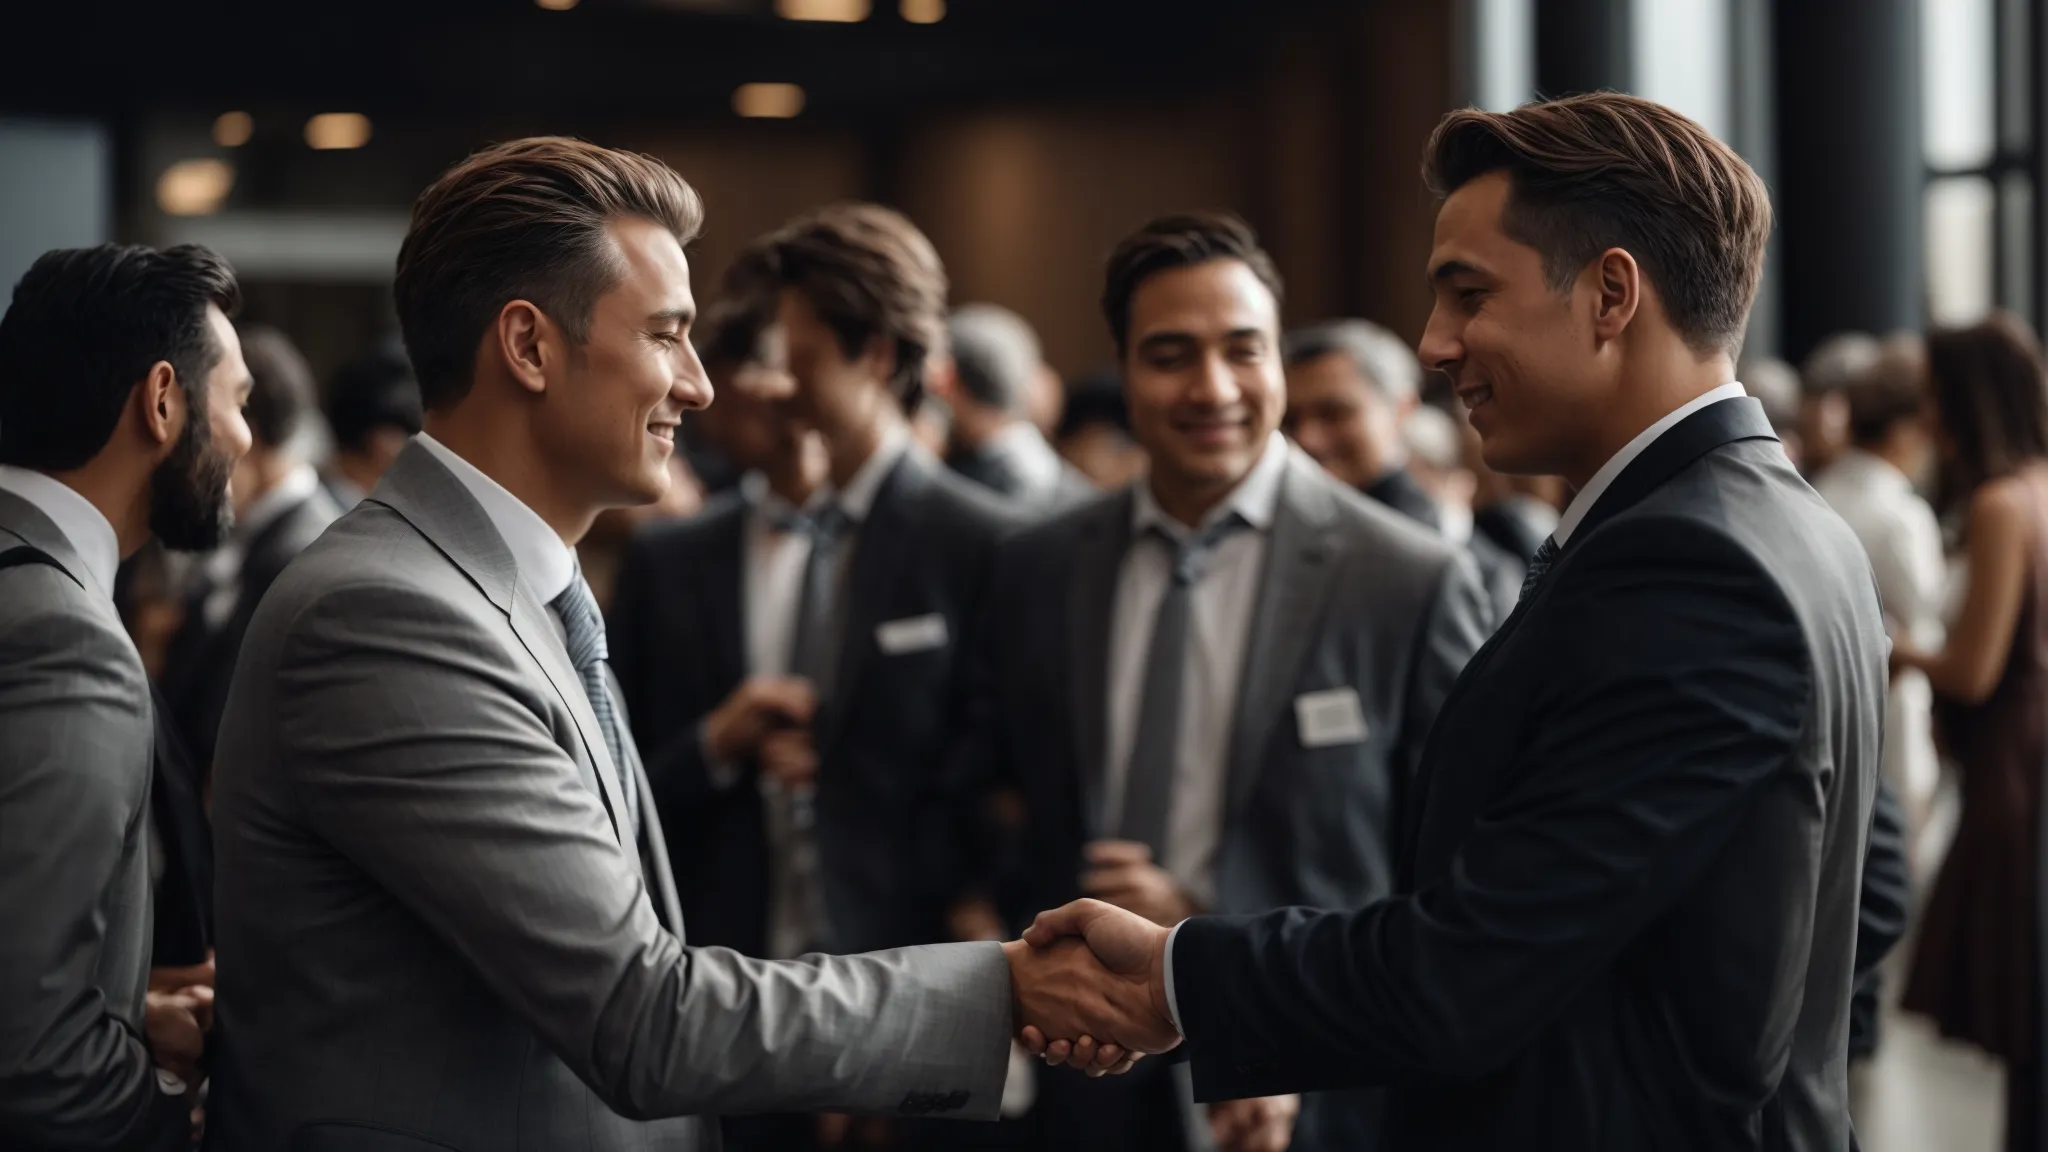 two professionals shaking hands at a networking event with a backdrop of bustling conference activity.